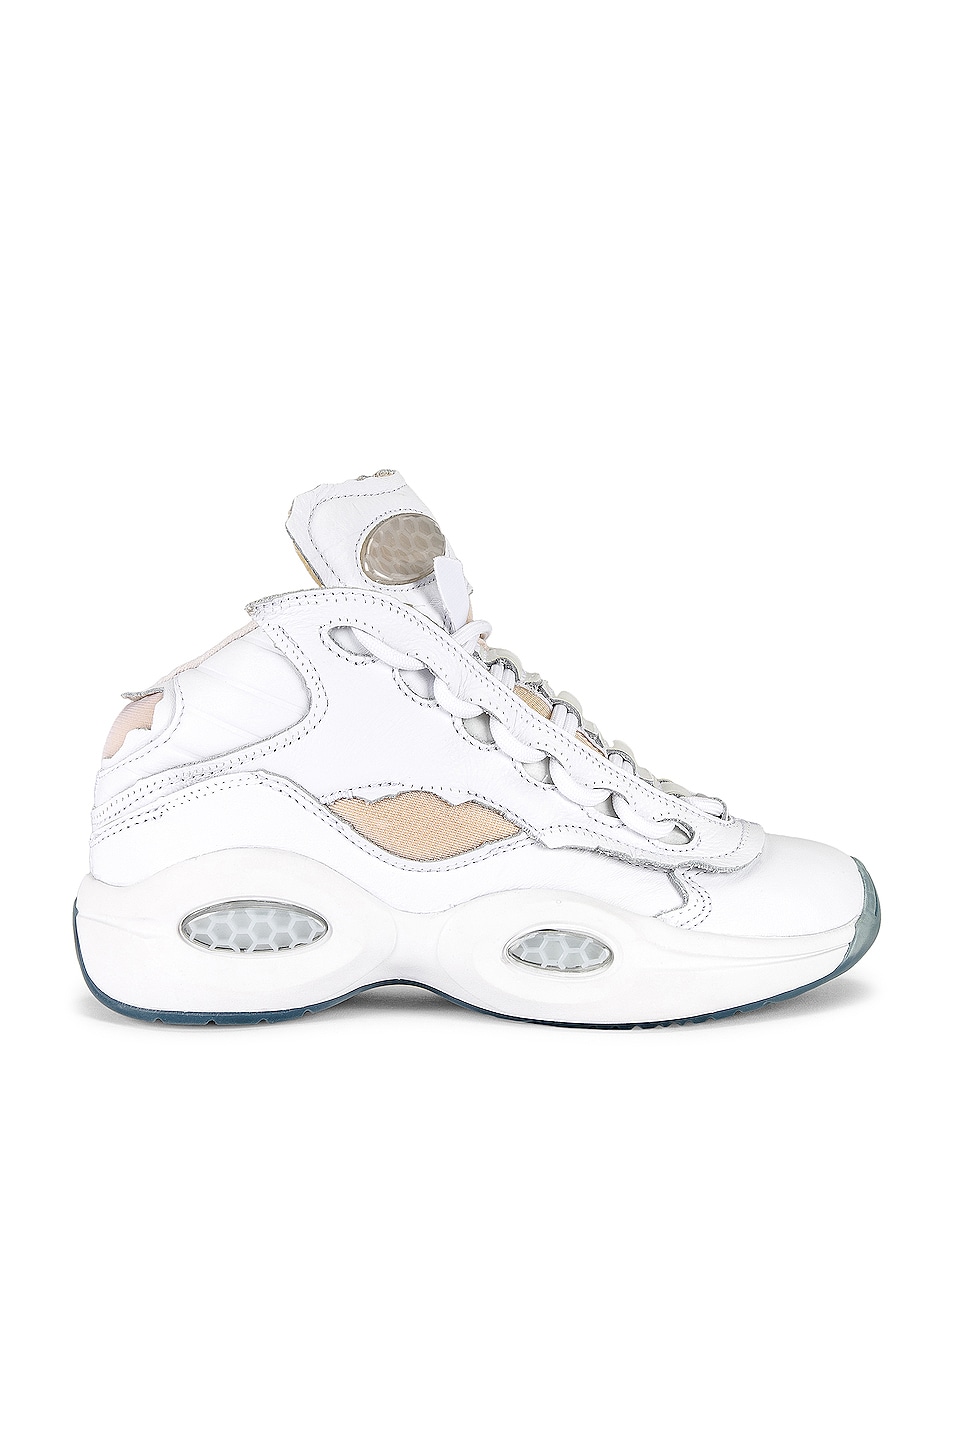 Image 1 of MAISON MARGIELA x REEBOK The Question Memory Of in White